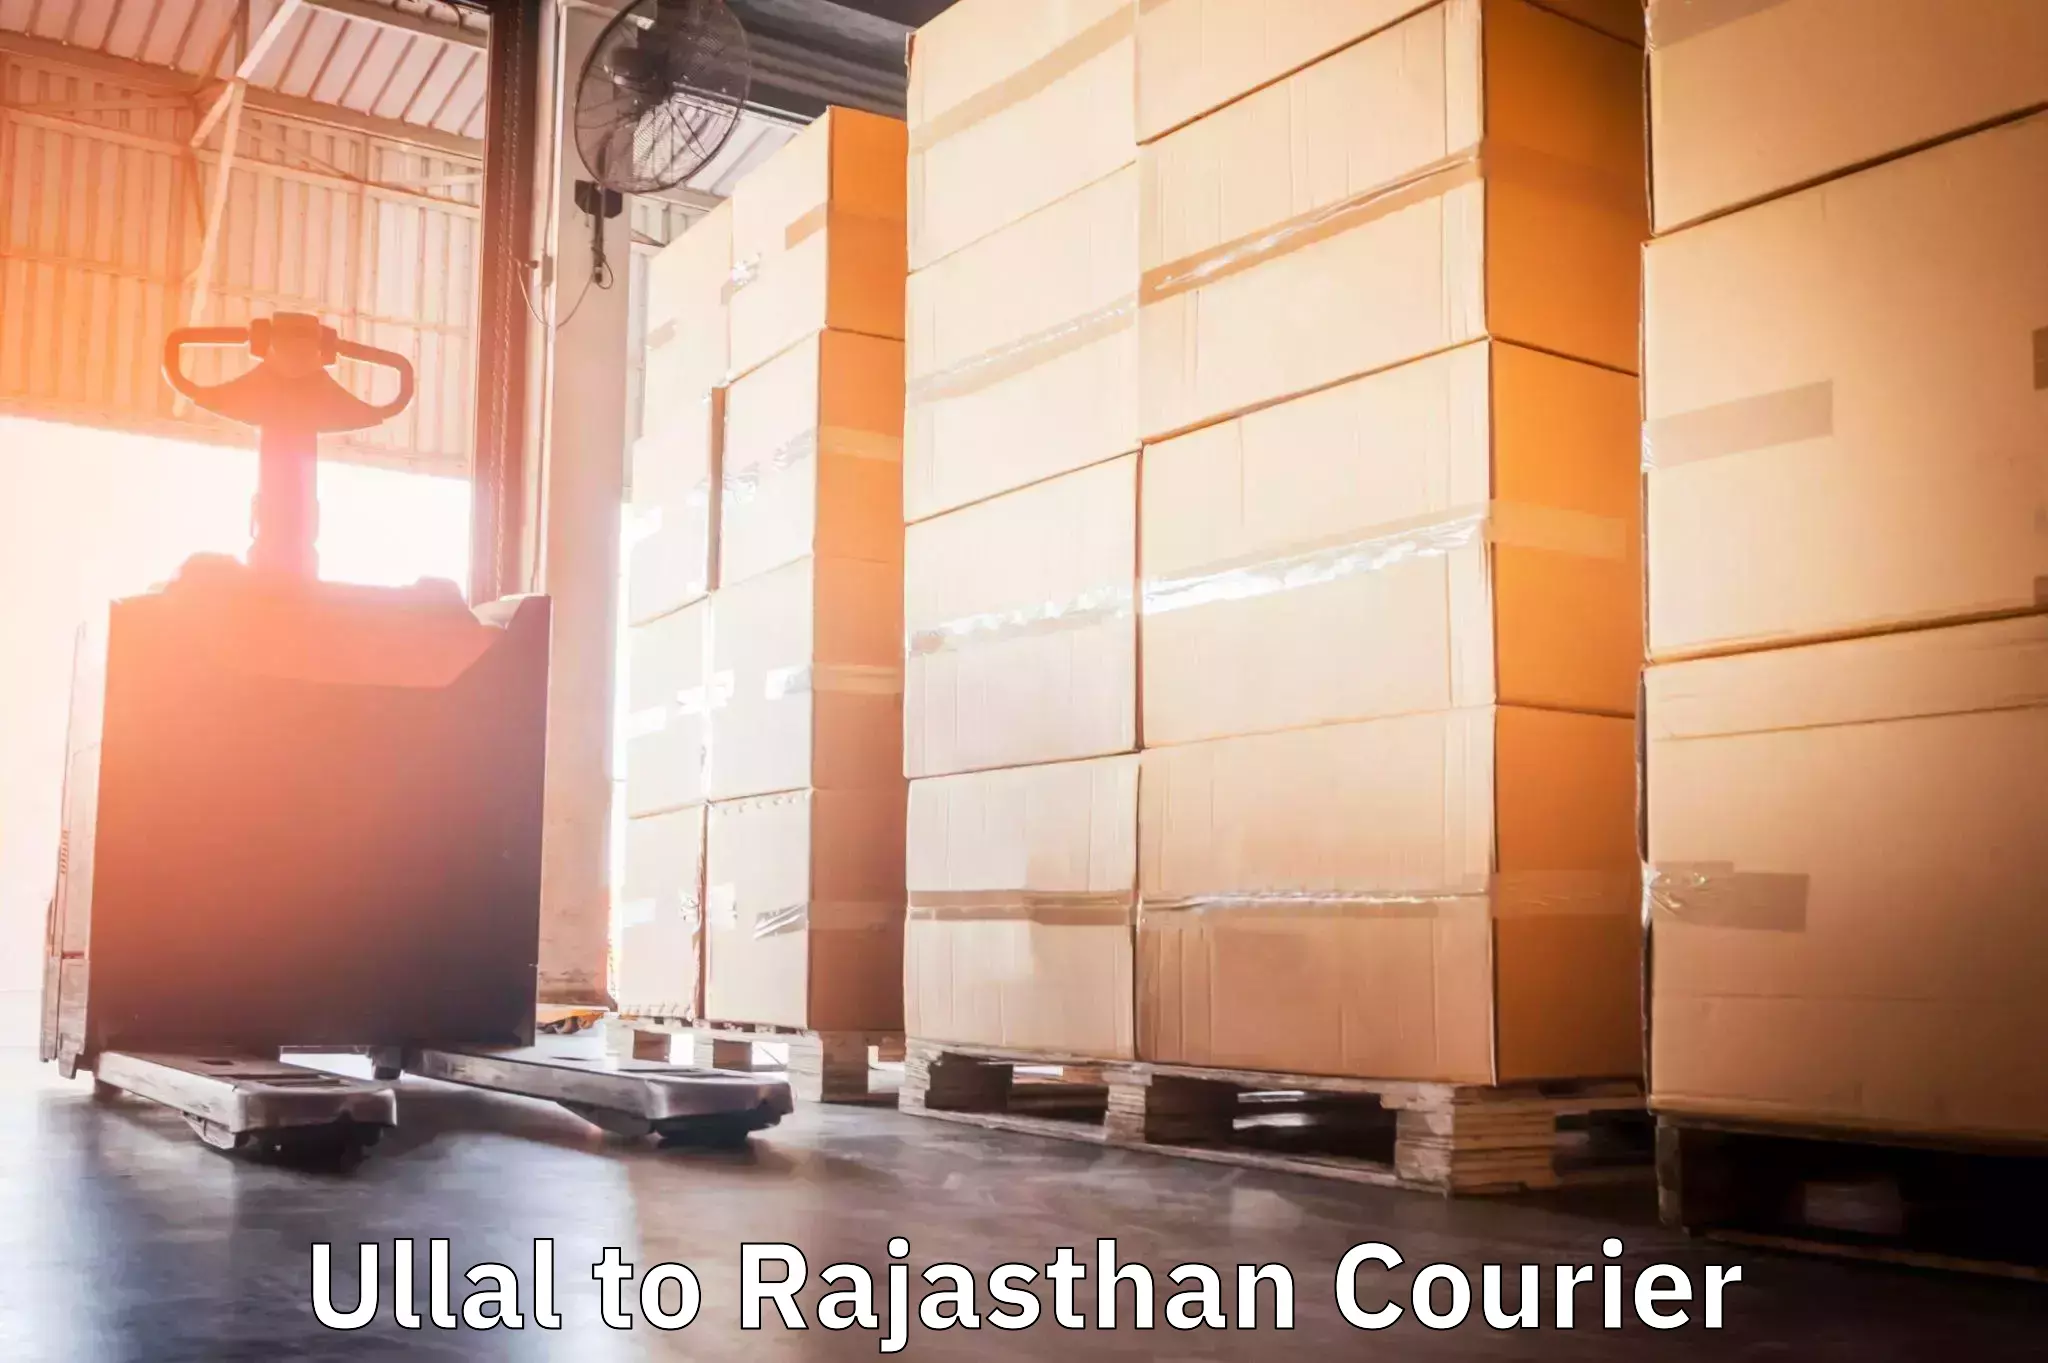 Courier service partnerships Ullal to Rajasthan